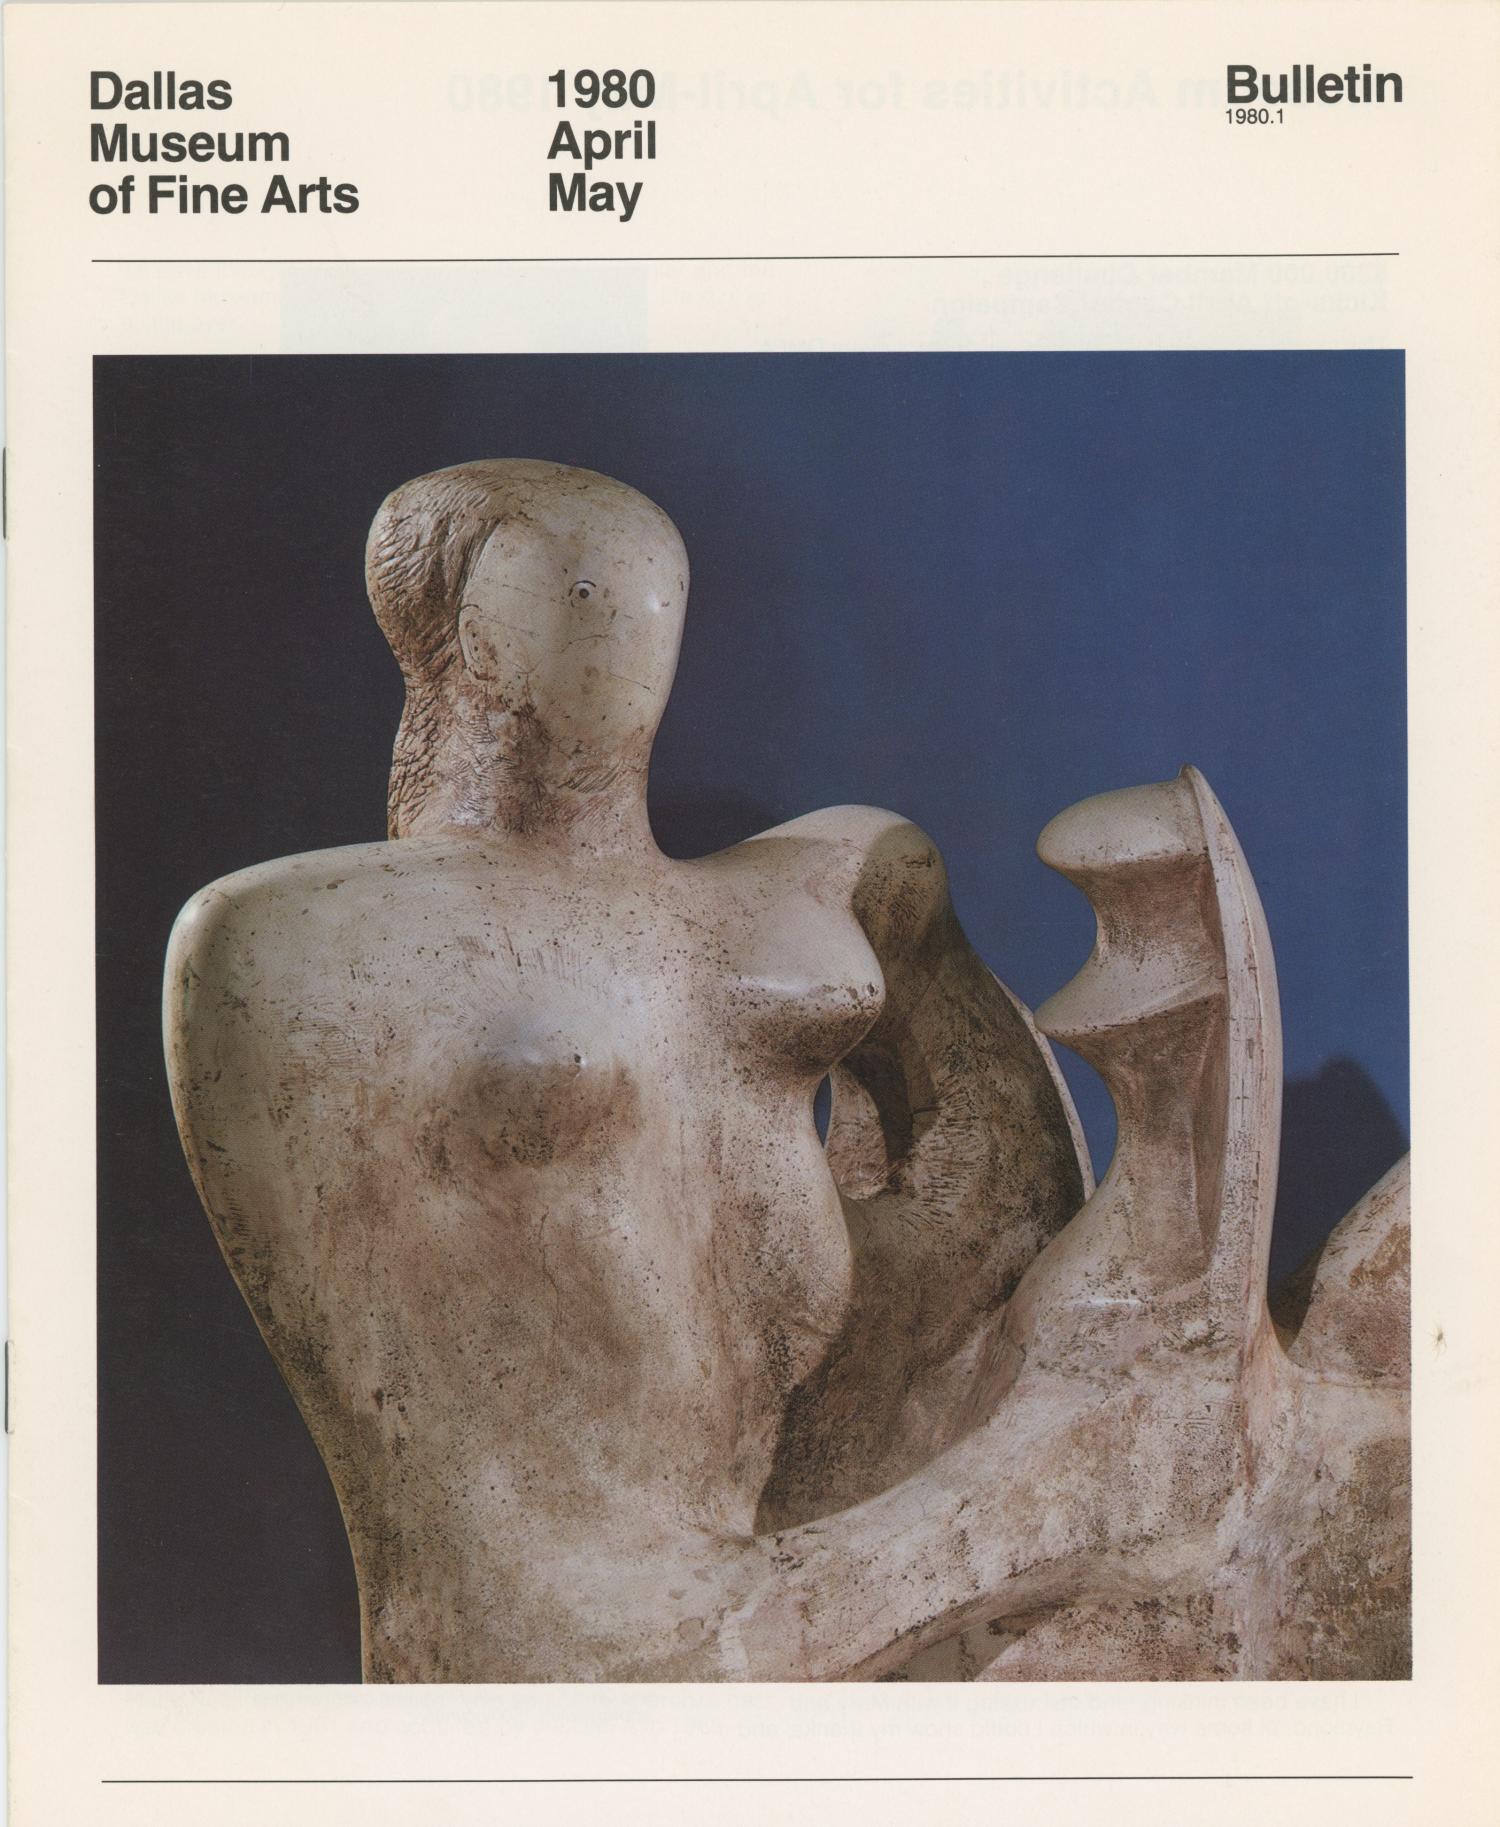 Dallas Museum of Fine Arts Bulletin, April-May 1980
                                                
                                                    Front Cover
                                                